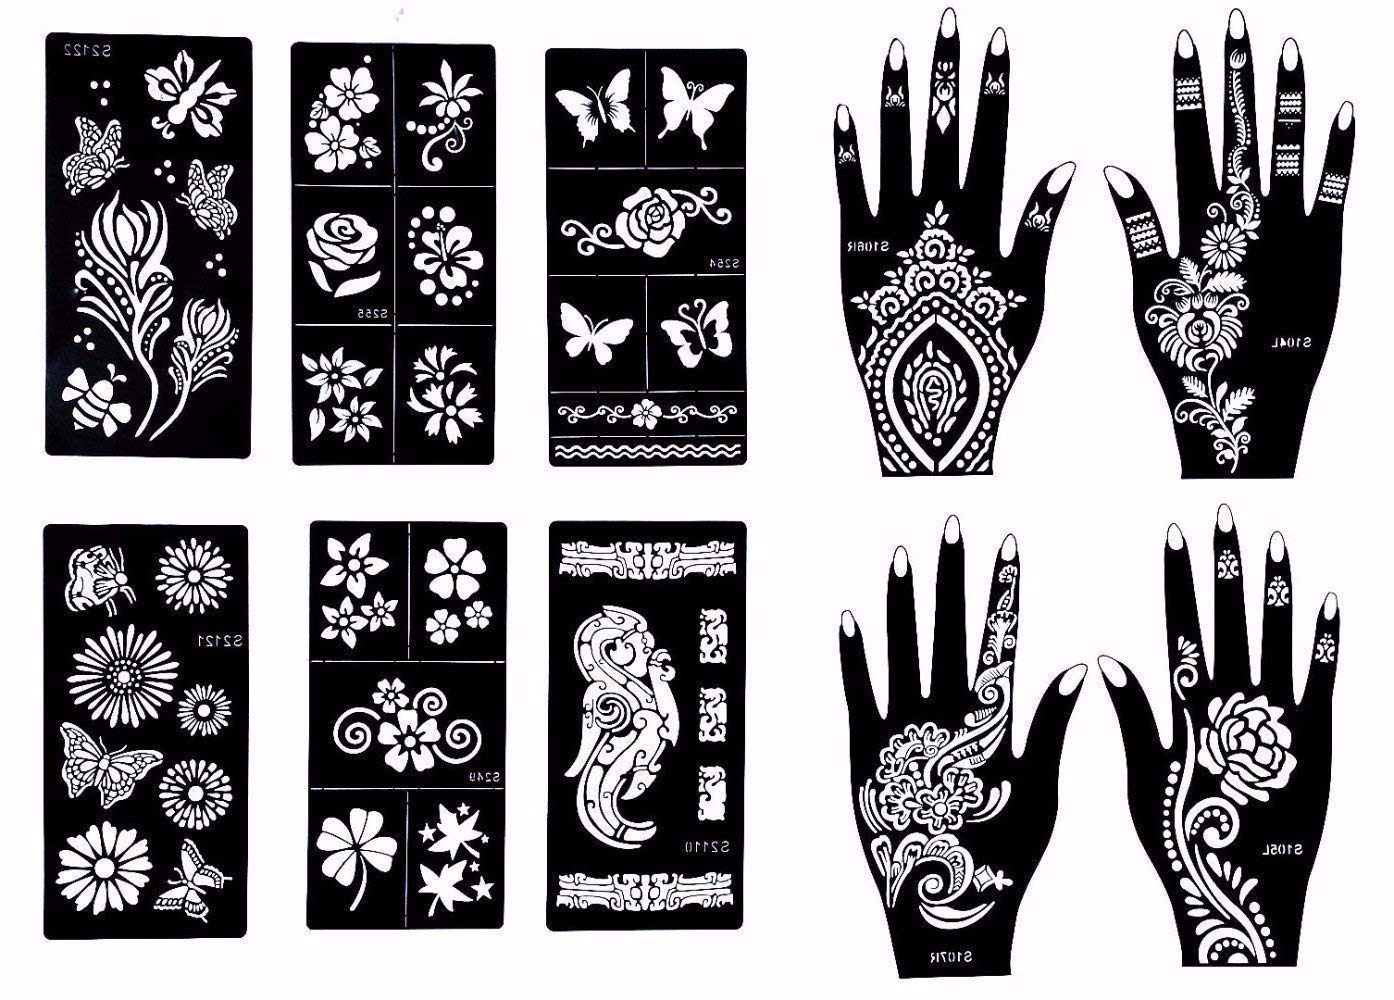 Gilded Girl Reusable Stencils for Henna Tattoo (10 Sheets) Beautiful Hands and Body Art Temporary Tattoo Templates, Airbrush / Face paint / Glitter /Self-Adhesive Flower, Butterfly Designs